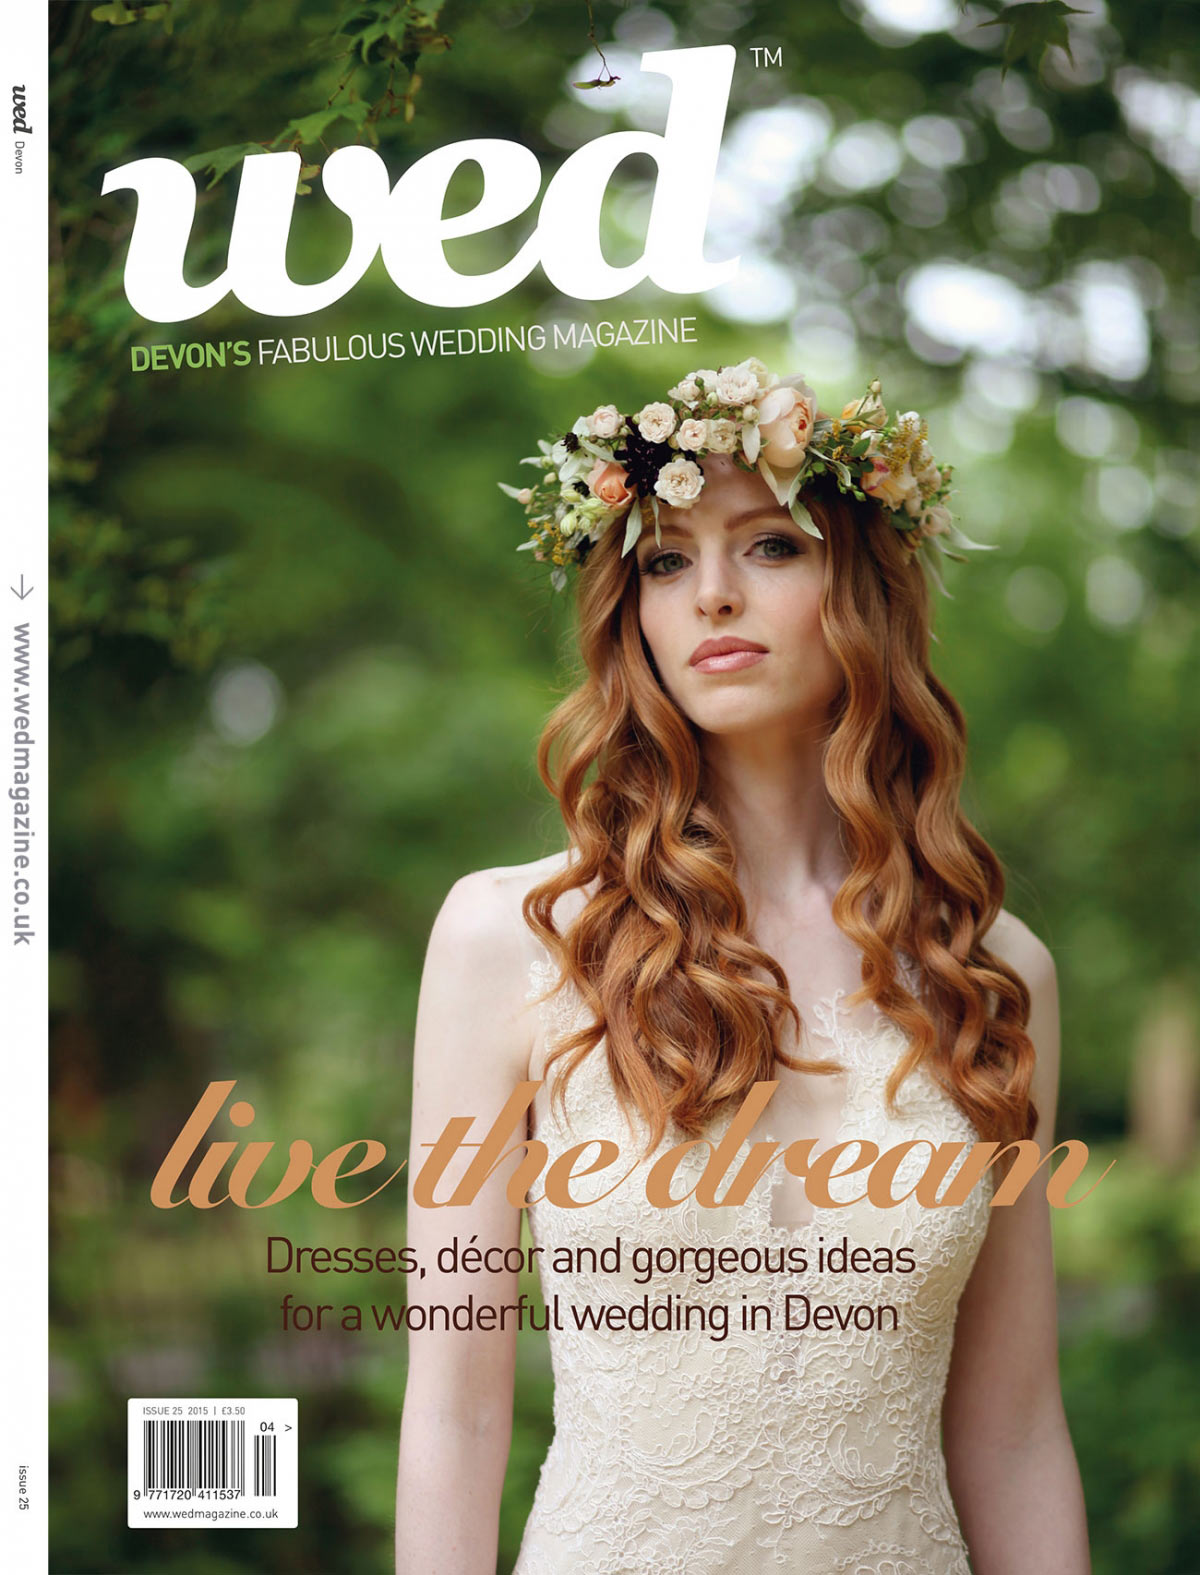 New Devon Wed out now!